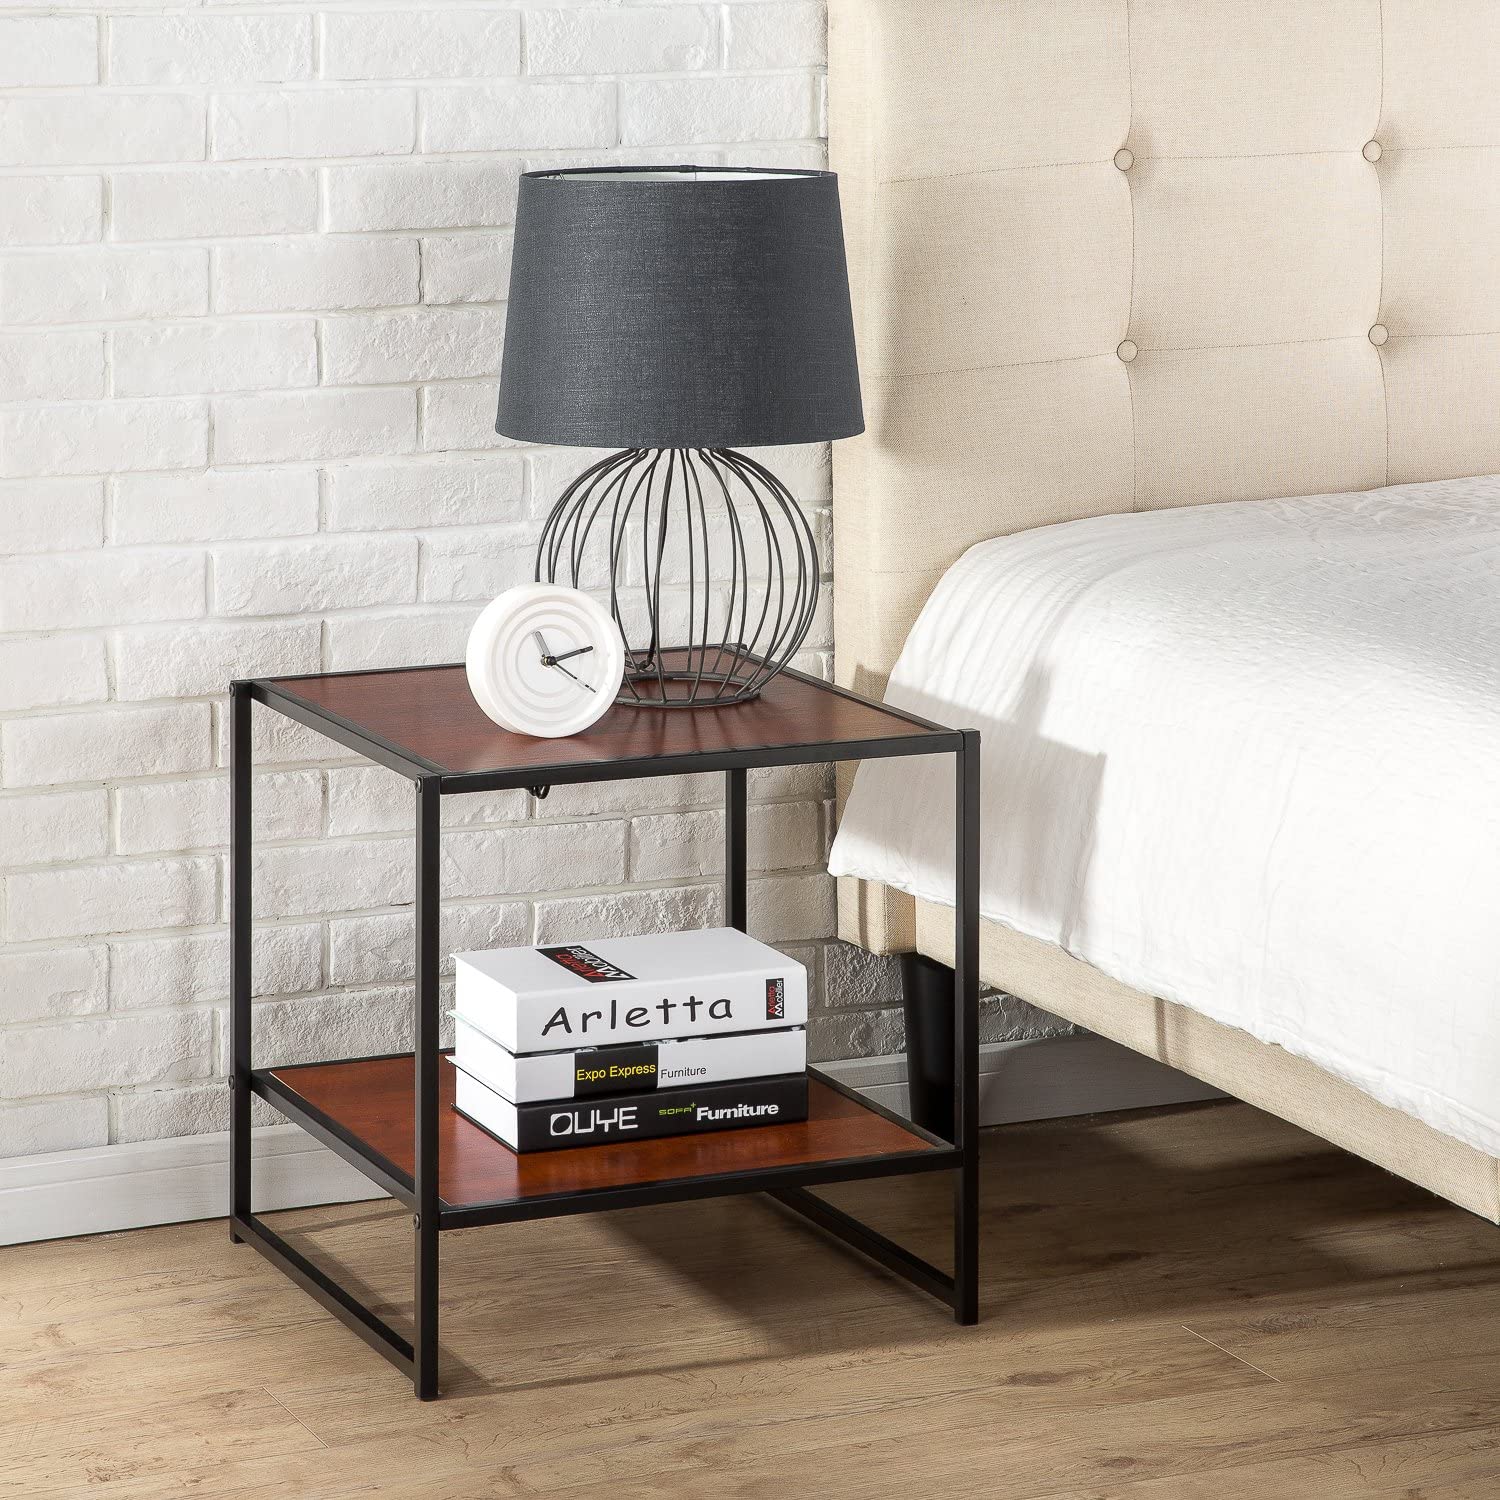 Side Tables:Black Frame Side Table / End Table / Easy Assembly, Red mahogany wood grain